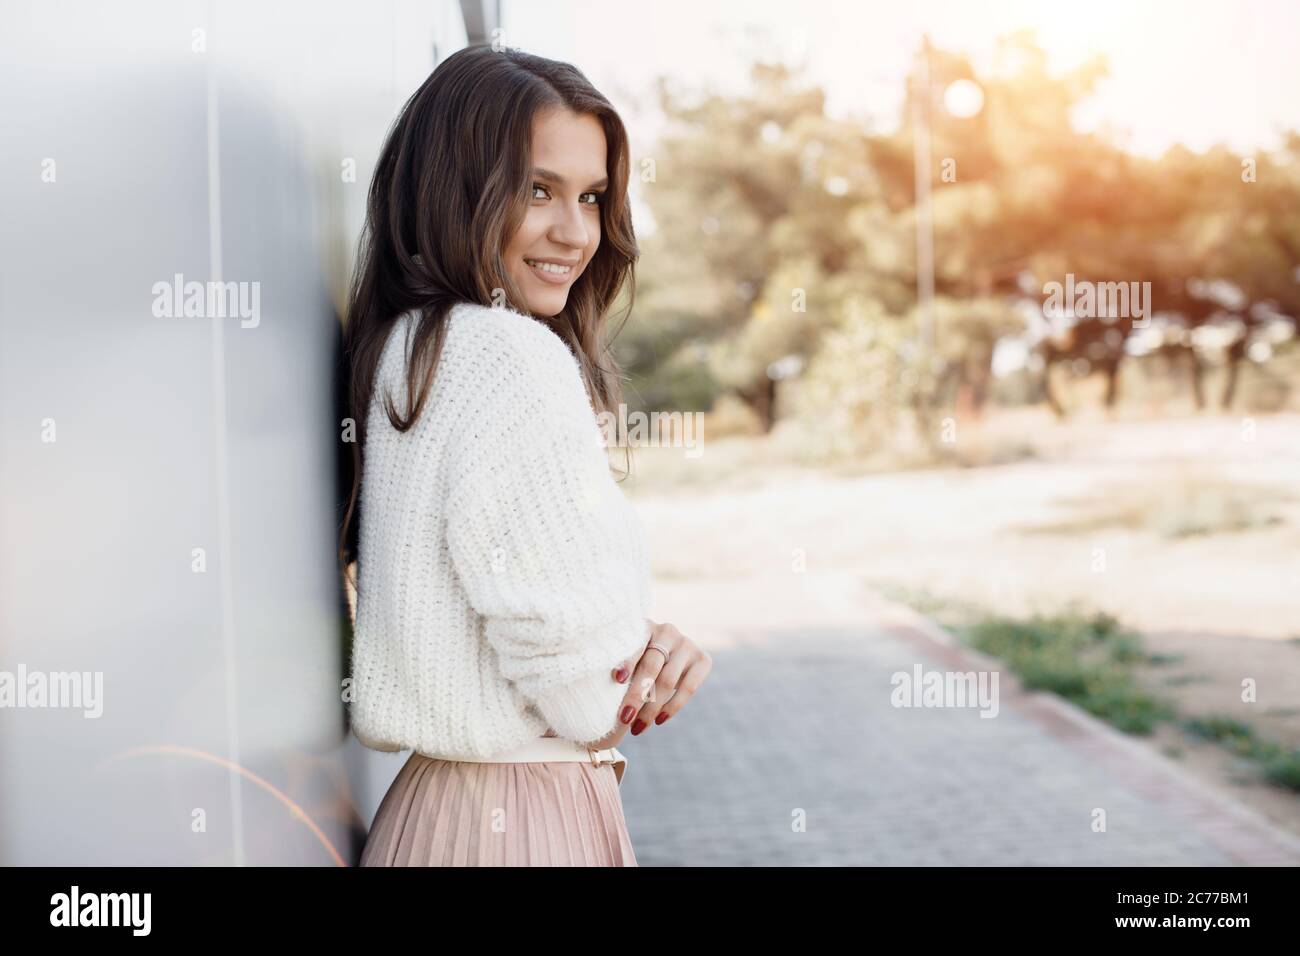 Portrait of a young smiling woman near wall outdoor Stock Photo